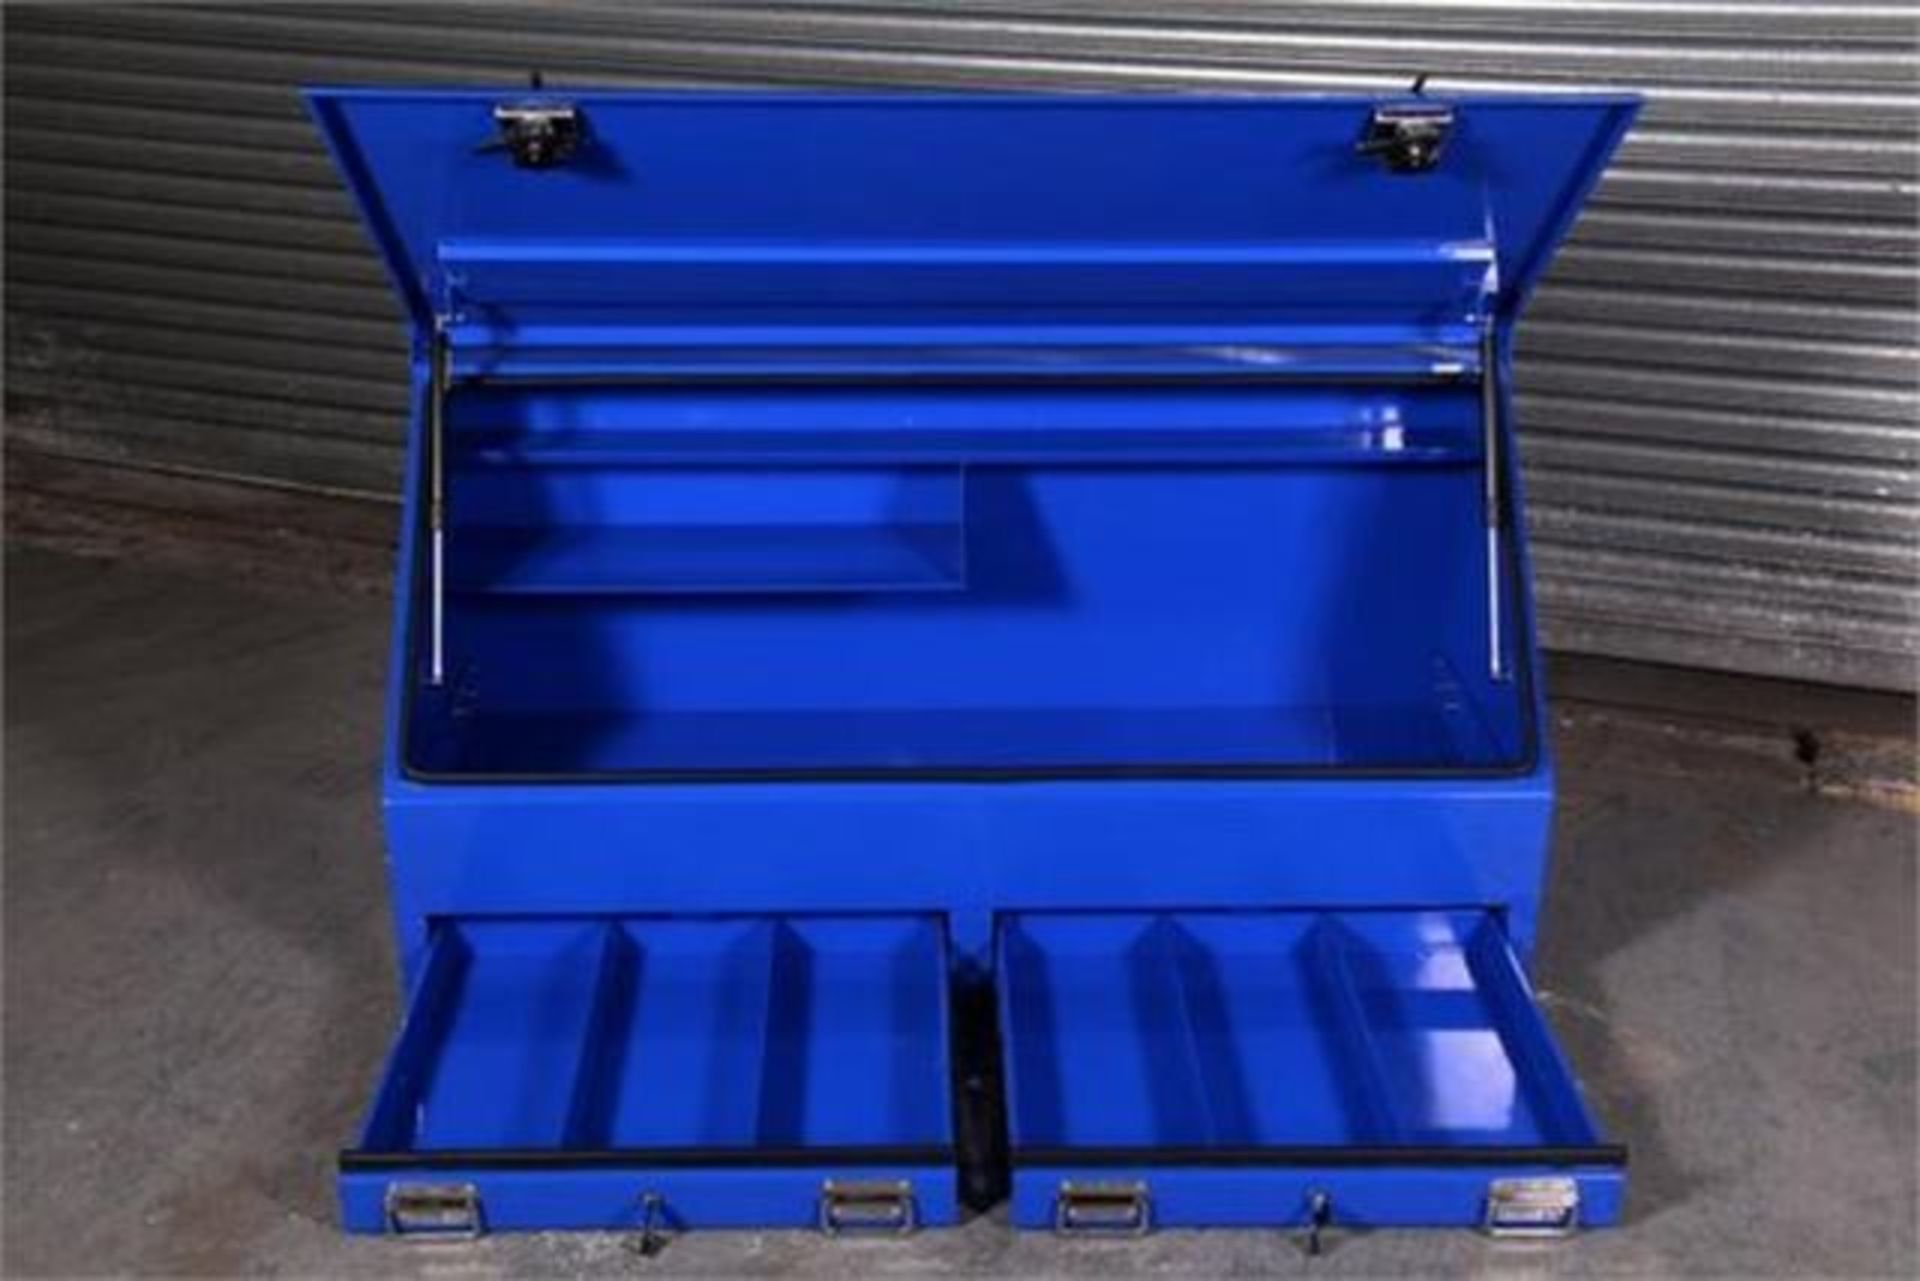 Mild steel vehicle toolbox powder coated grey the unit is fitted with twin gas struts on the lid and